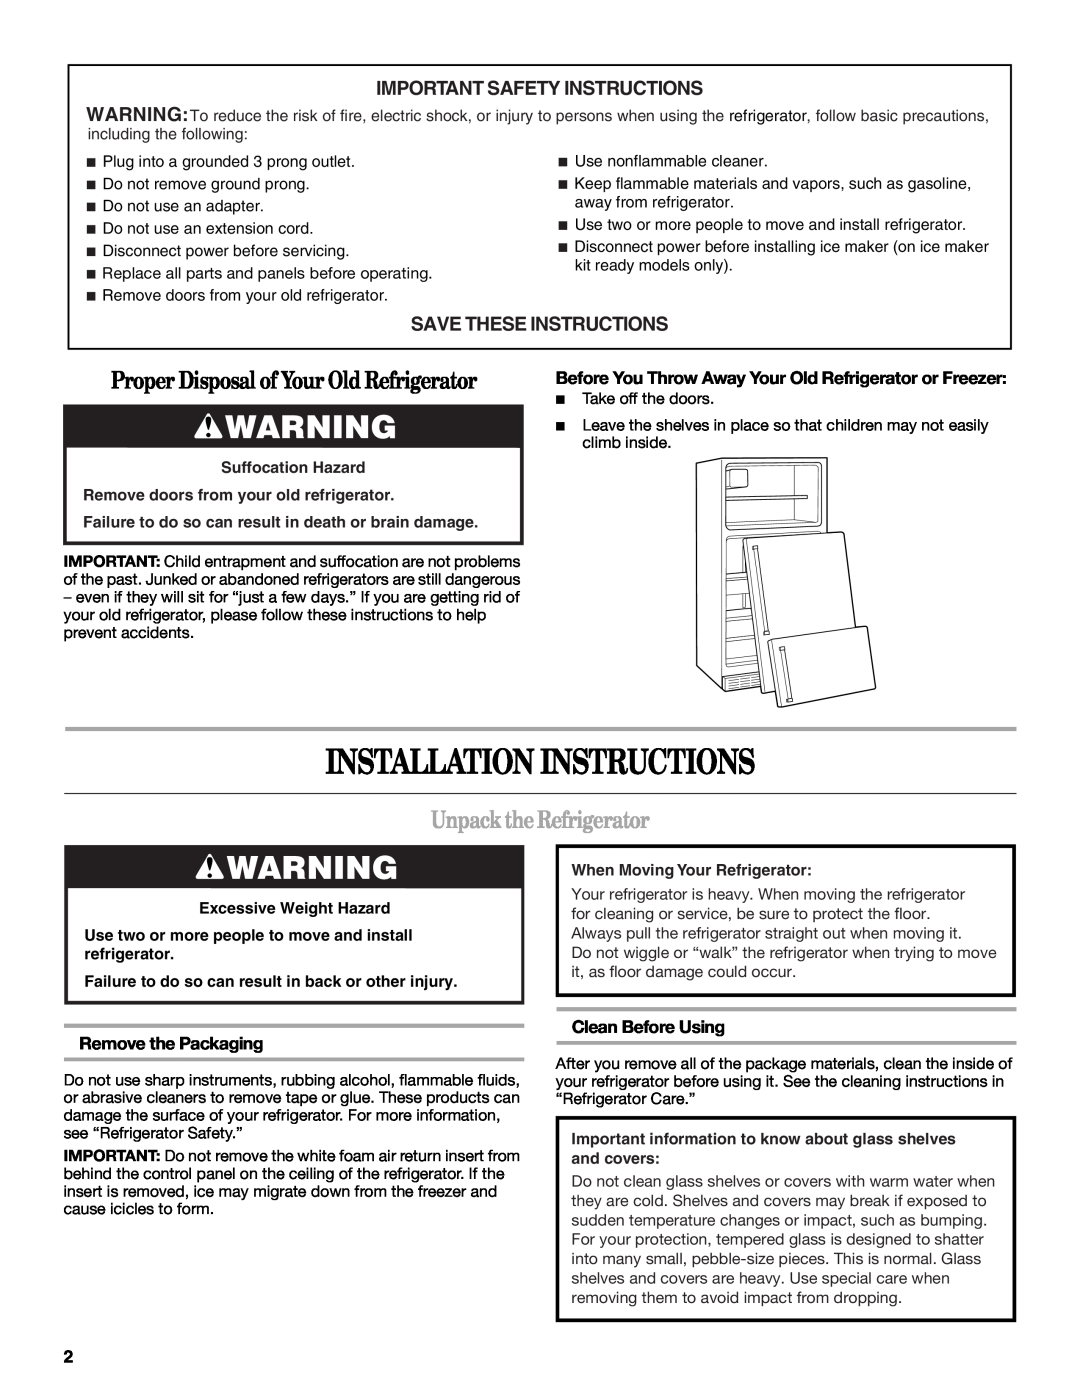 Whirlpool ET1MHKXM Installation Instructions, Unpack the Refrigerator, Important Safety Instructions, Remove the Packaging 